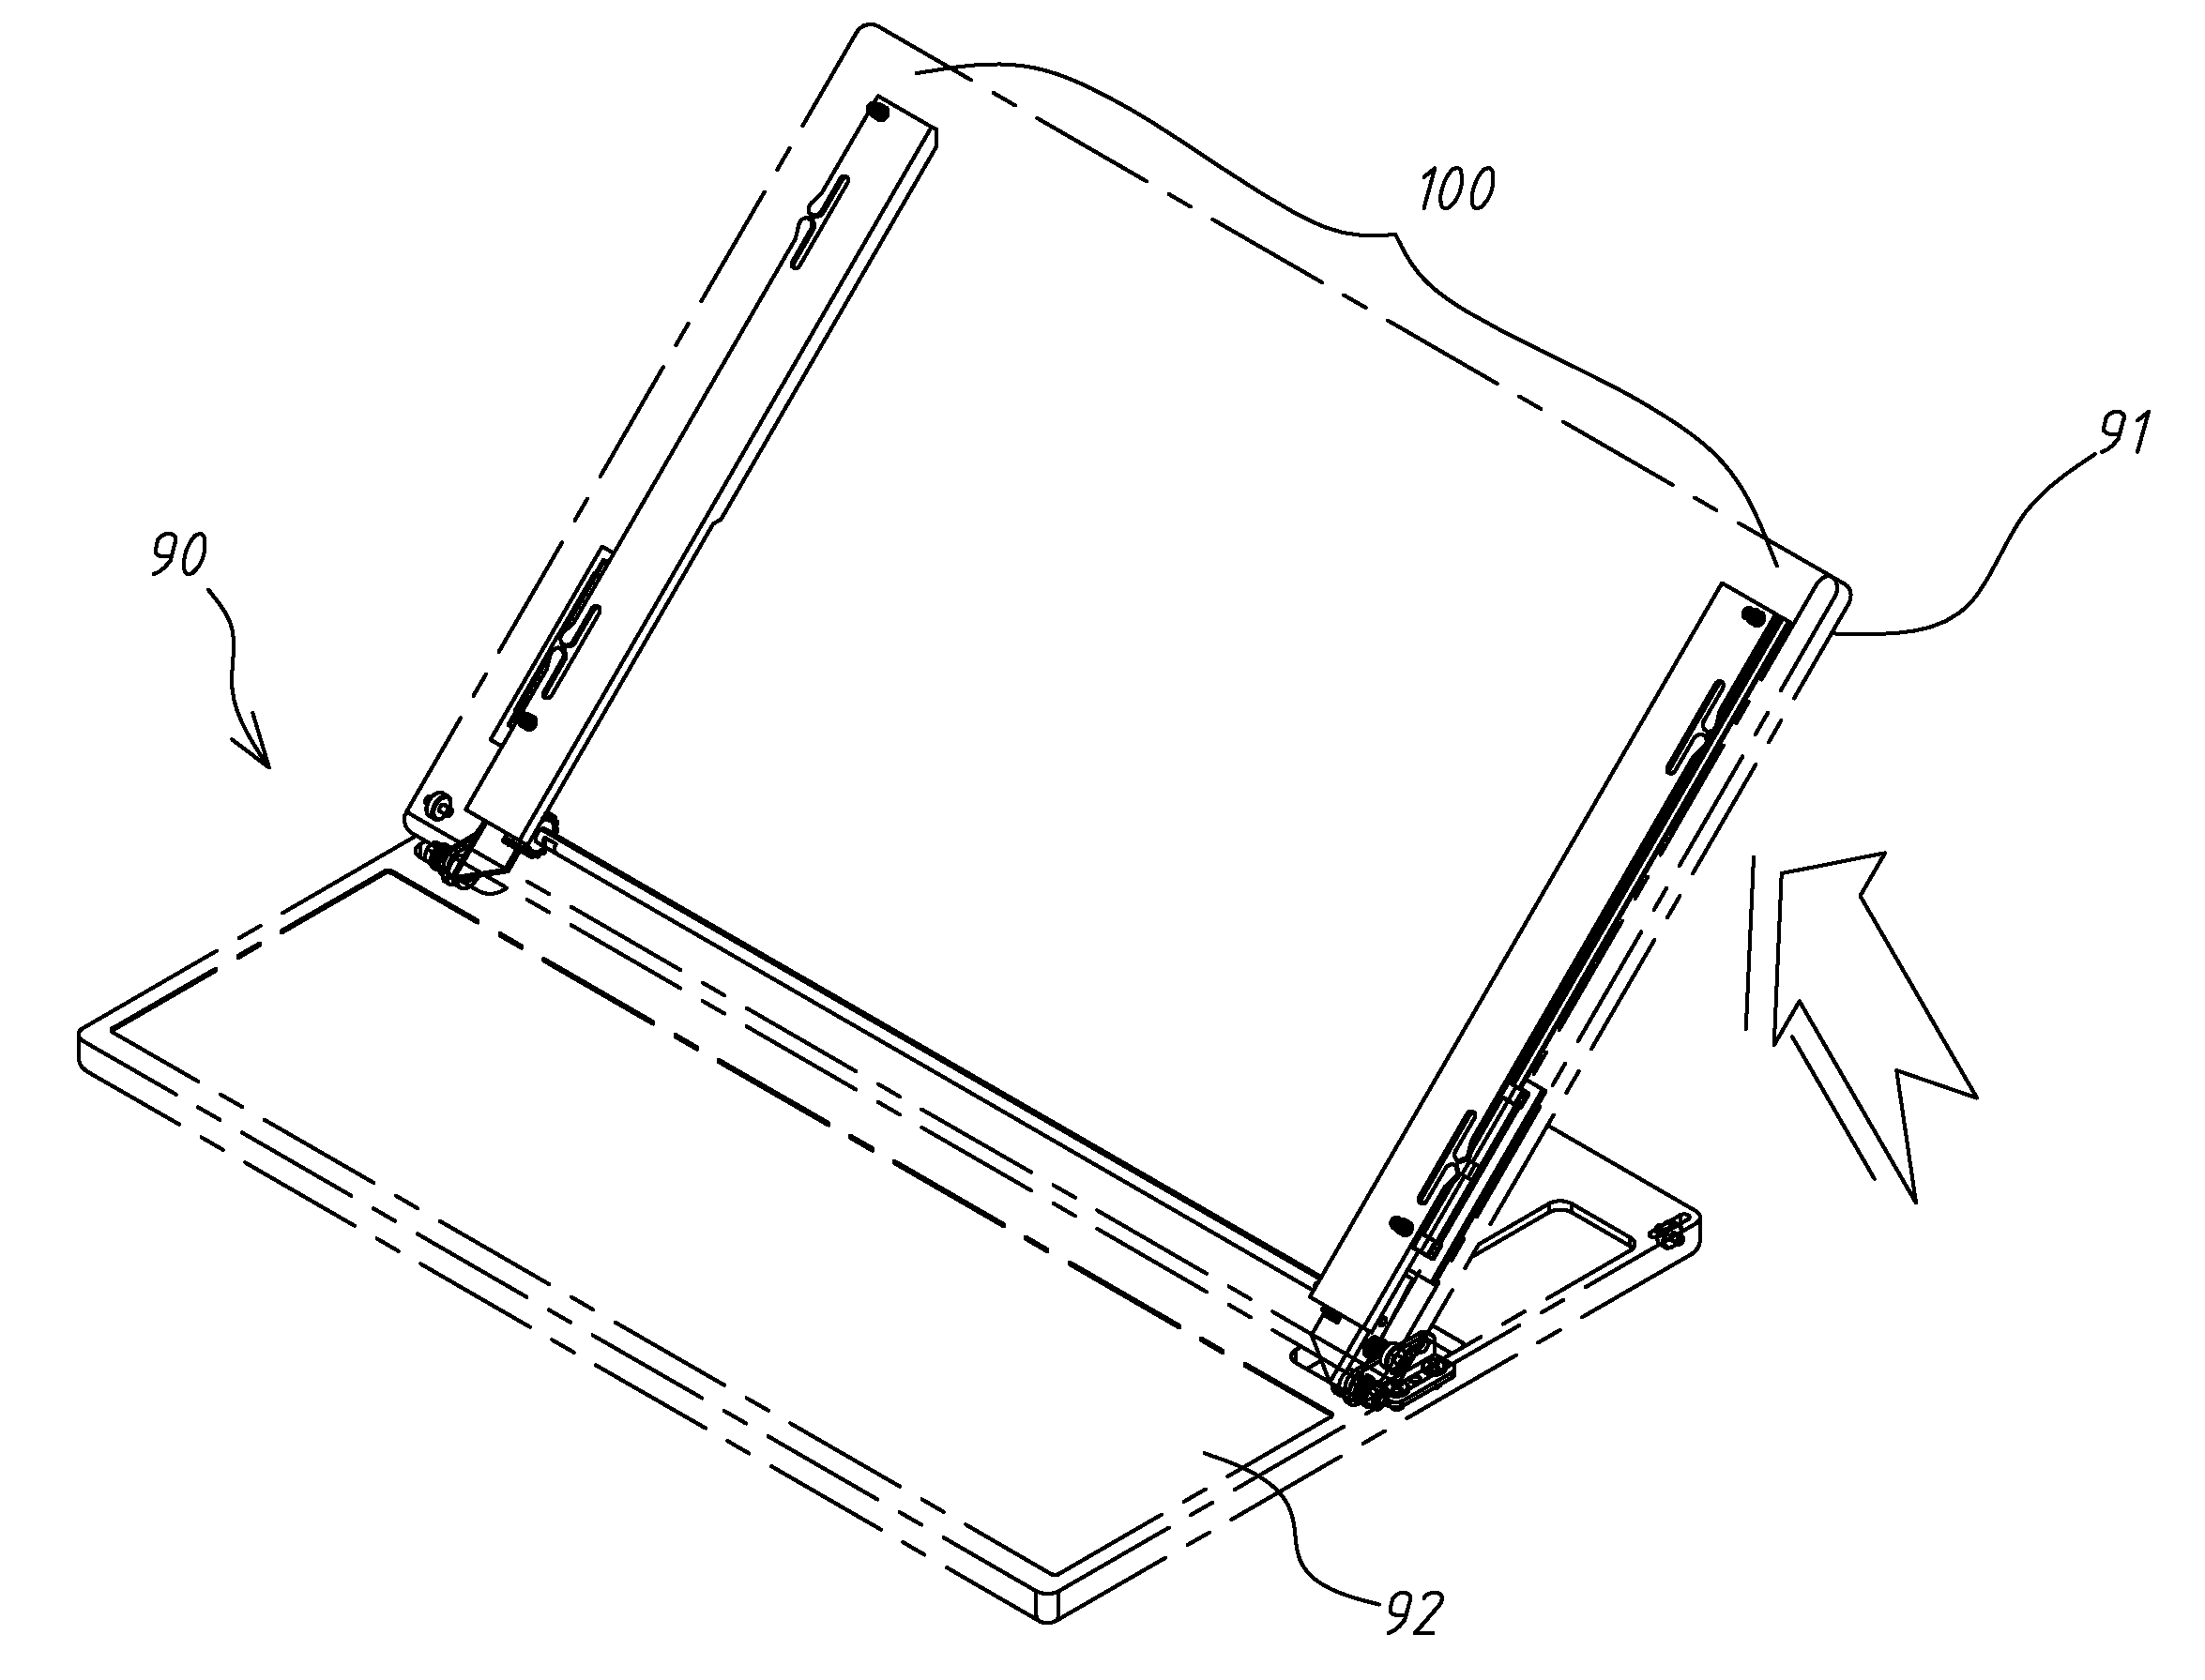 Liftable slide cover mounting structure using a sheet metal bracket mechanism